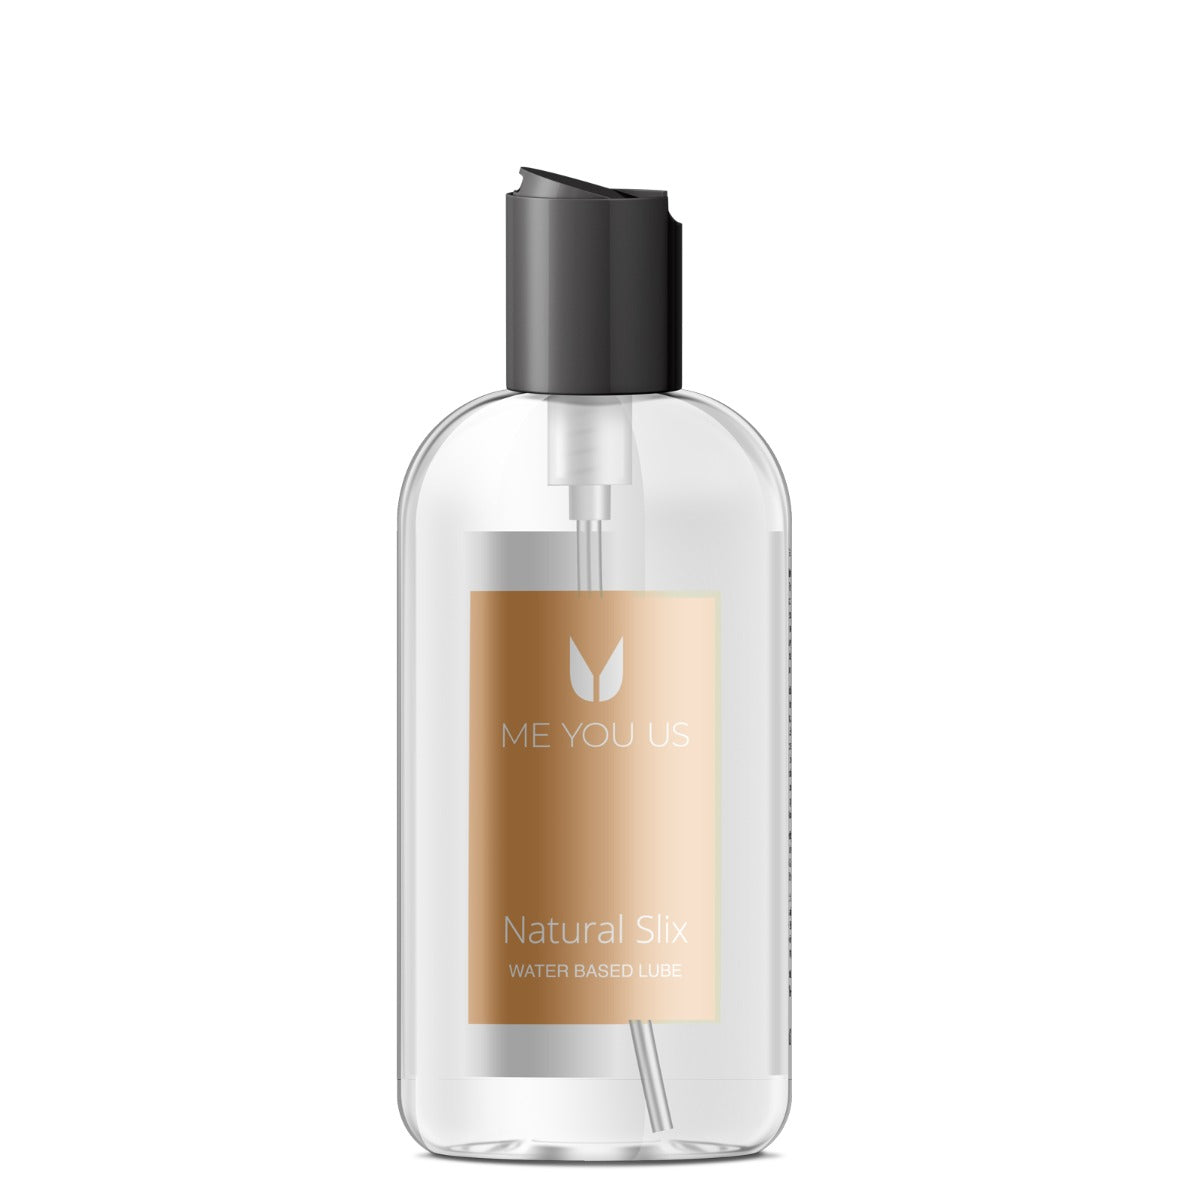 Me You Us | Natural Slix Water Based Lube - 250ml